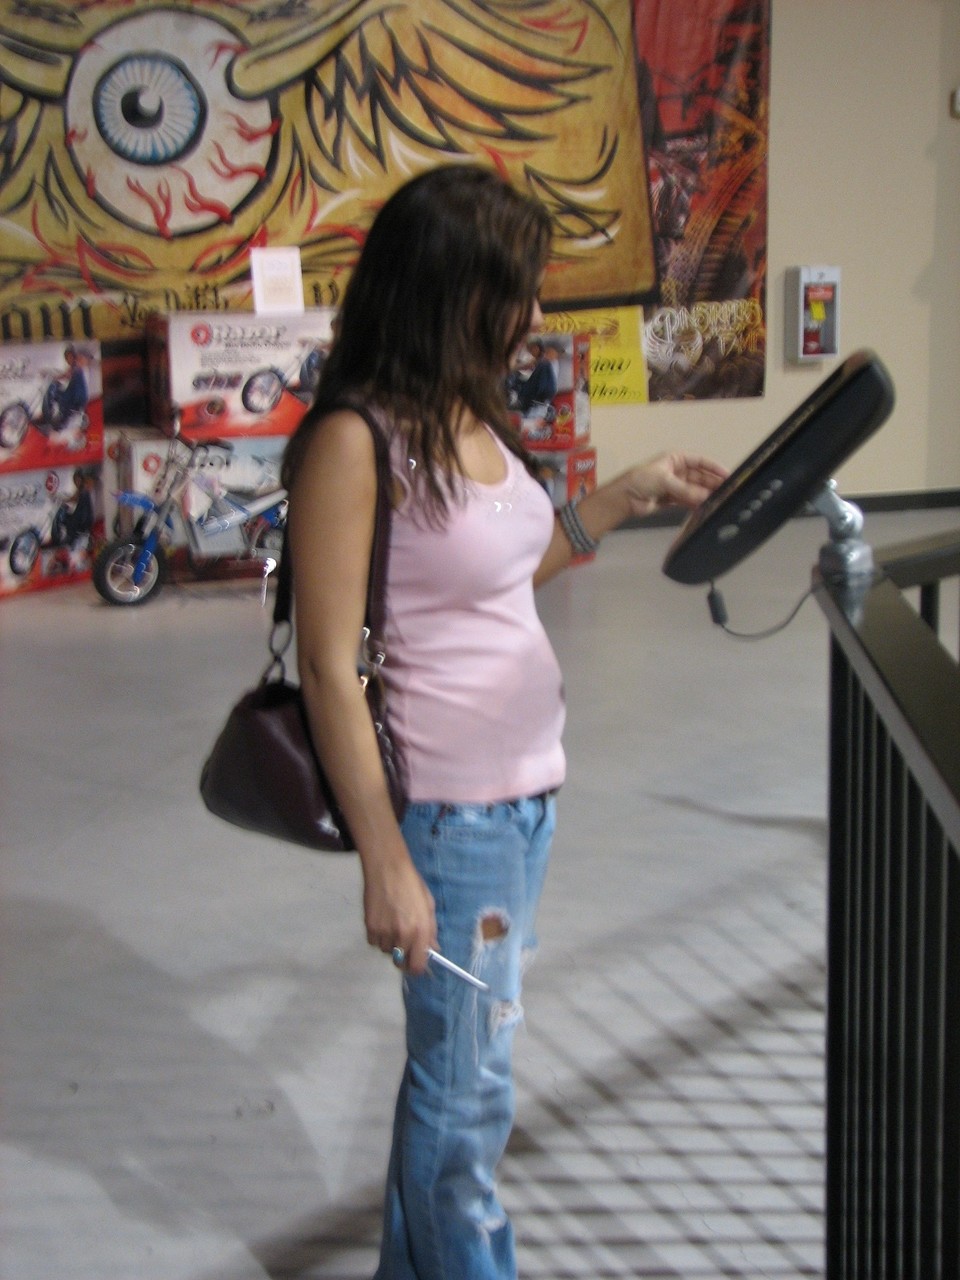 Amateur Katie in tight jeans flashes her big boobs with puffy nips in public Porno-Foto #426861592 | Teen Girl Photos Pics, Amateur, Mobiler Porno